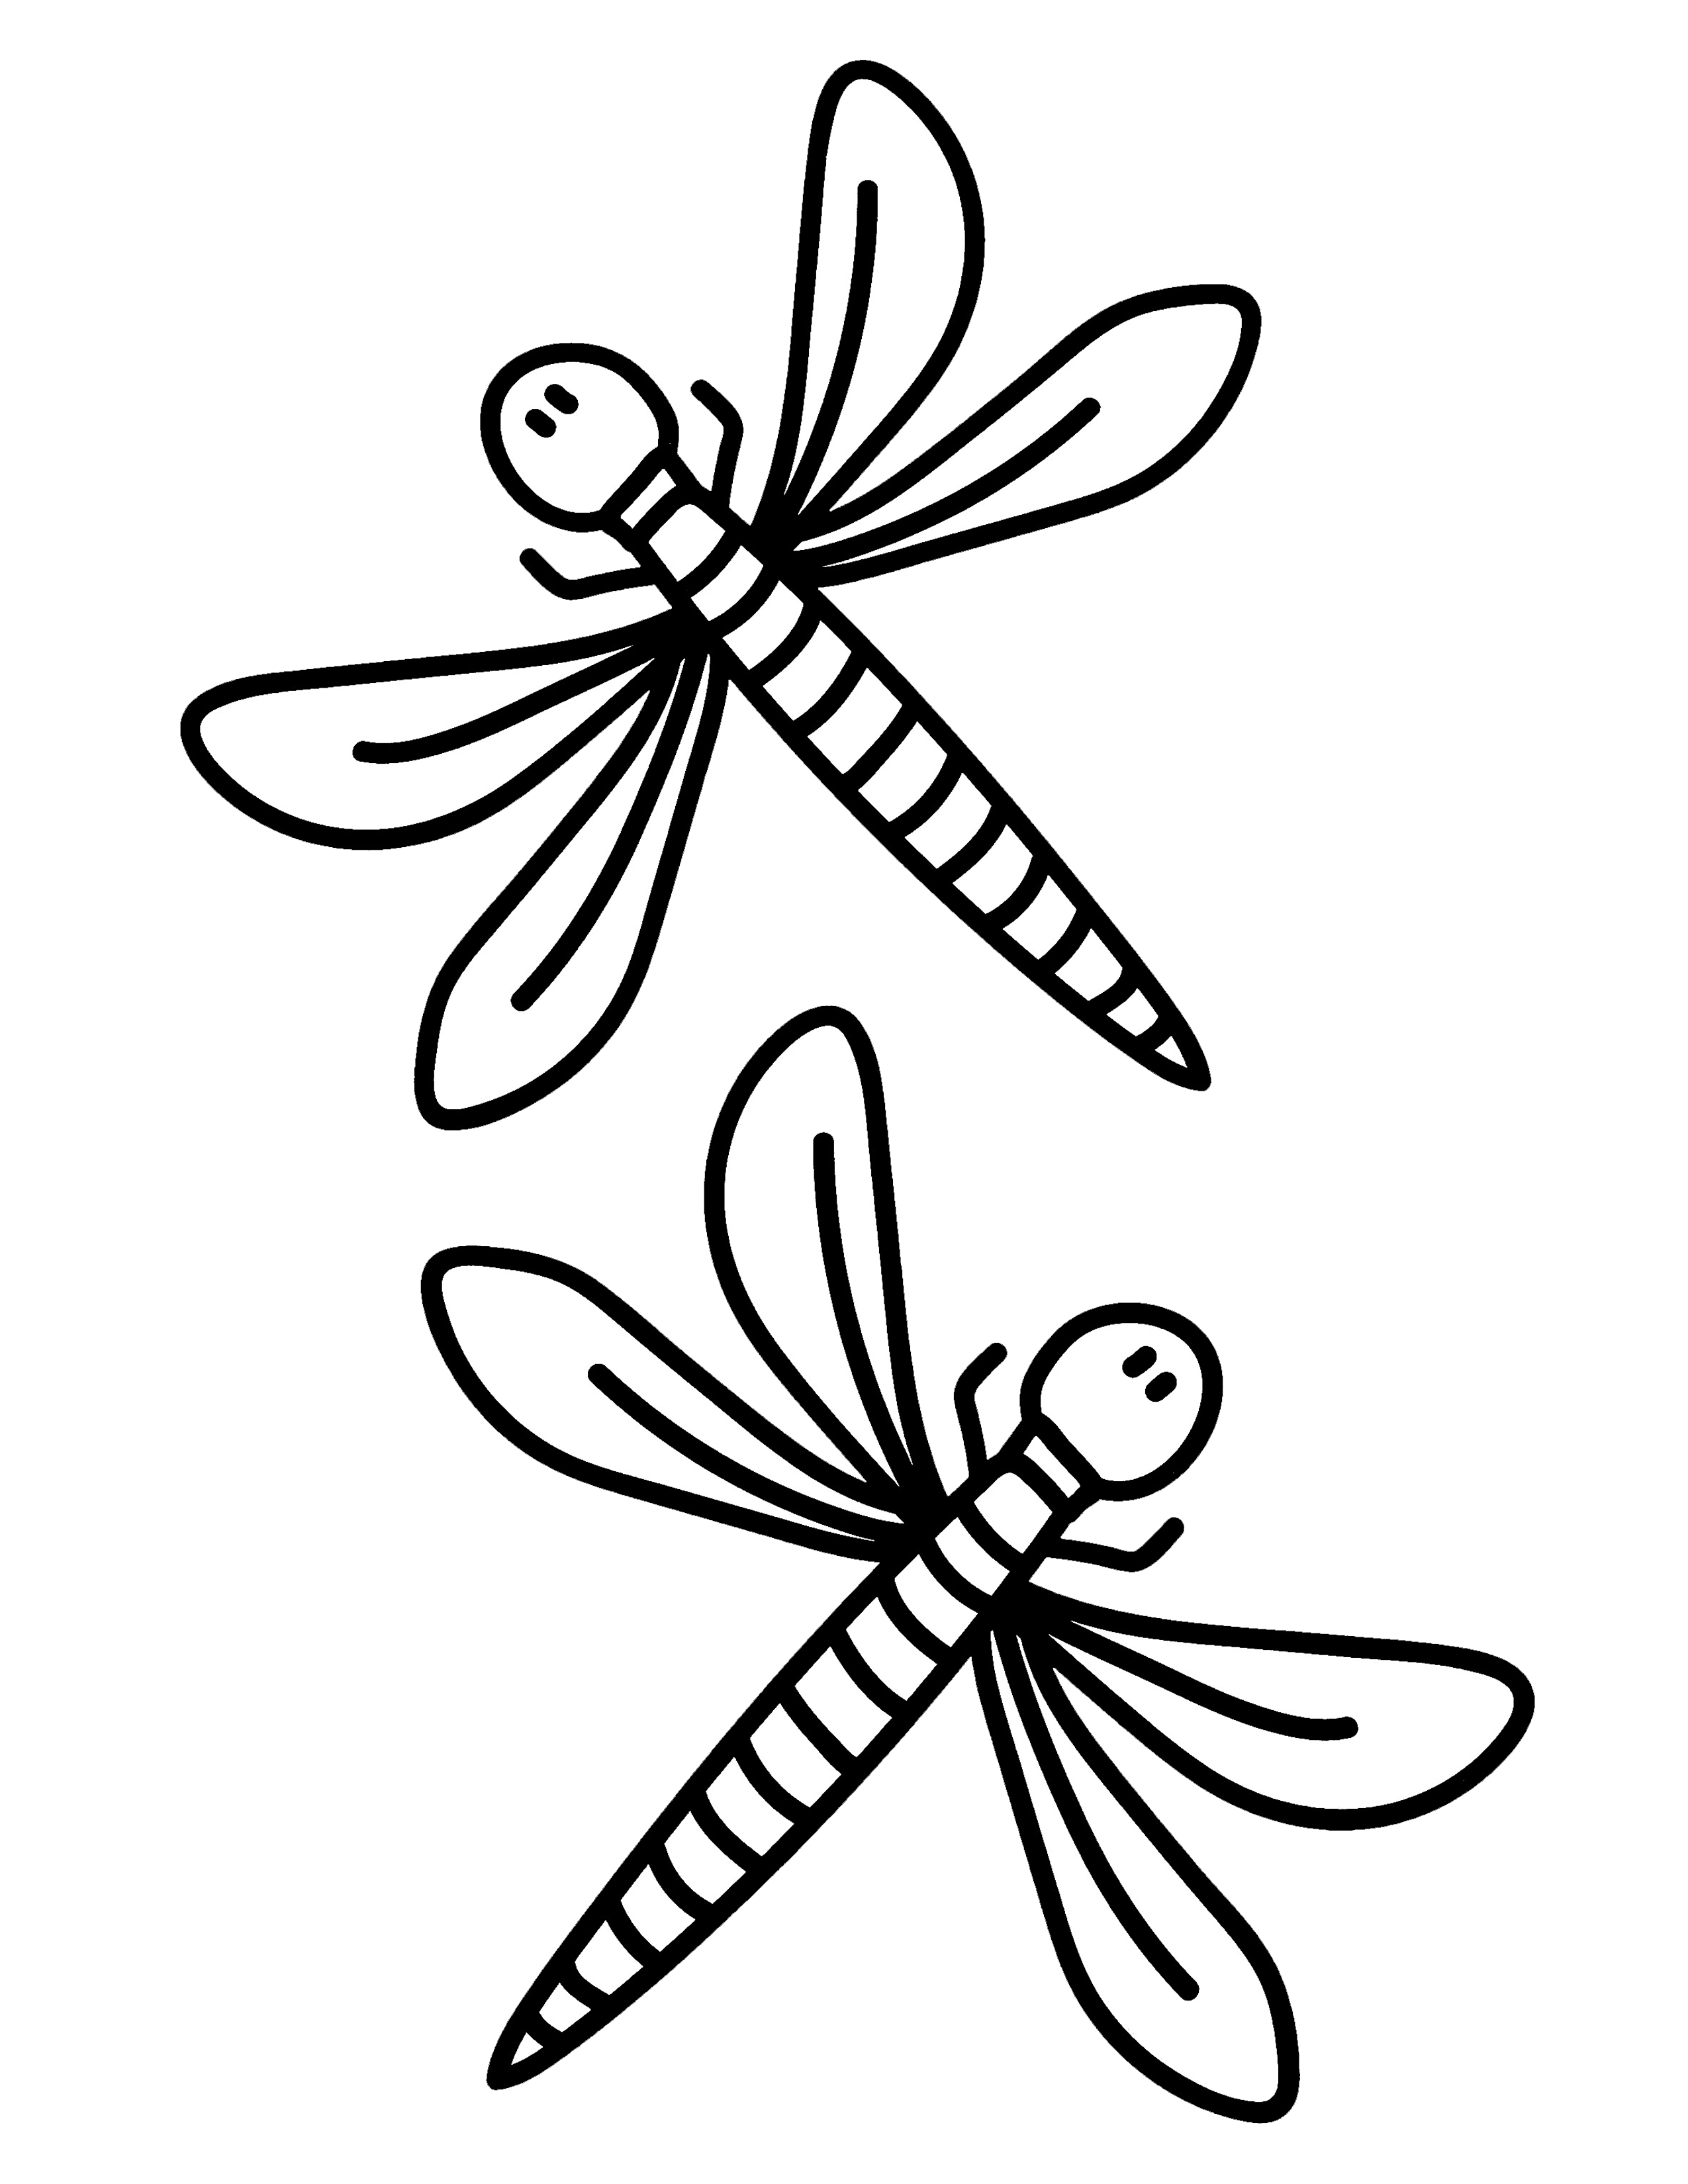 Dragonflies coloring page â kimmi the clown